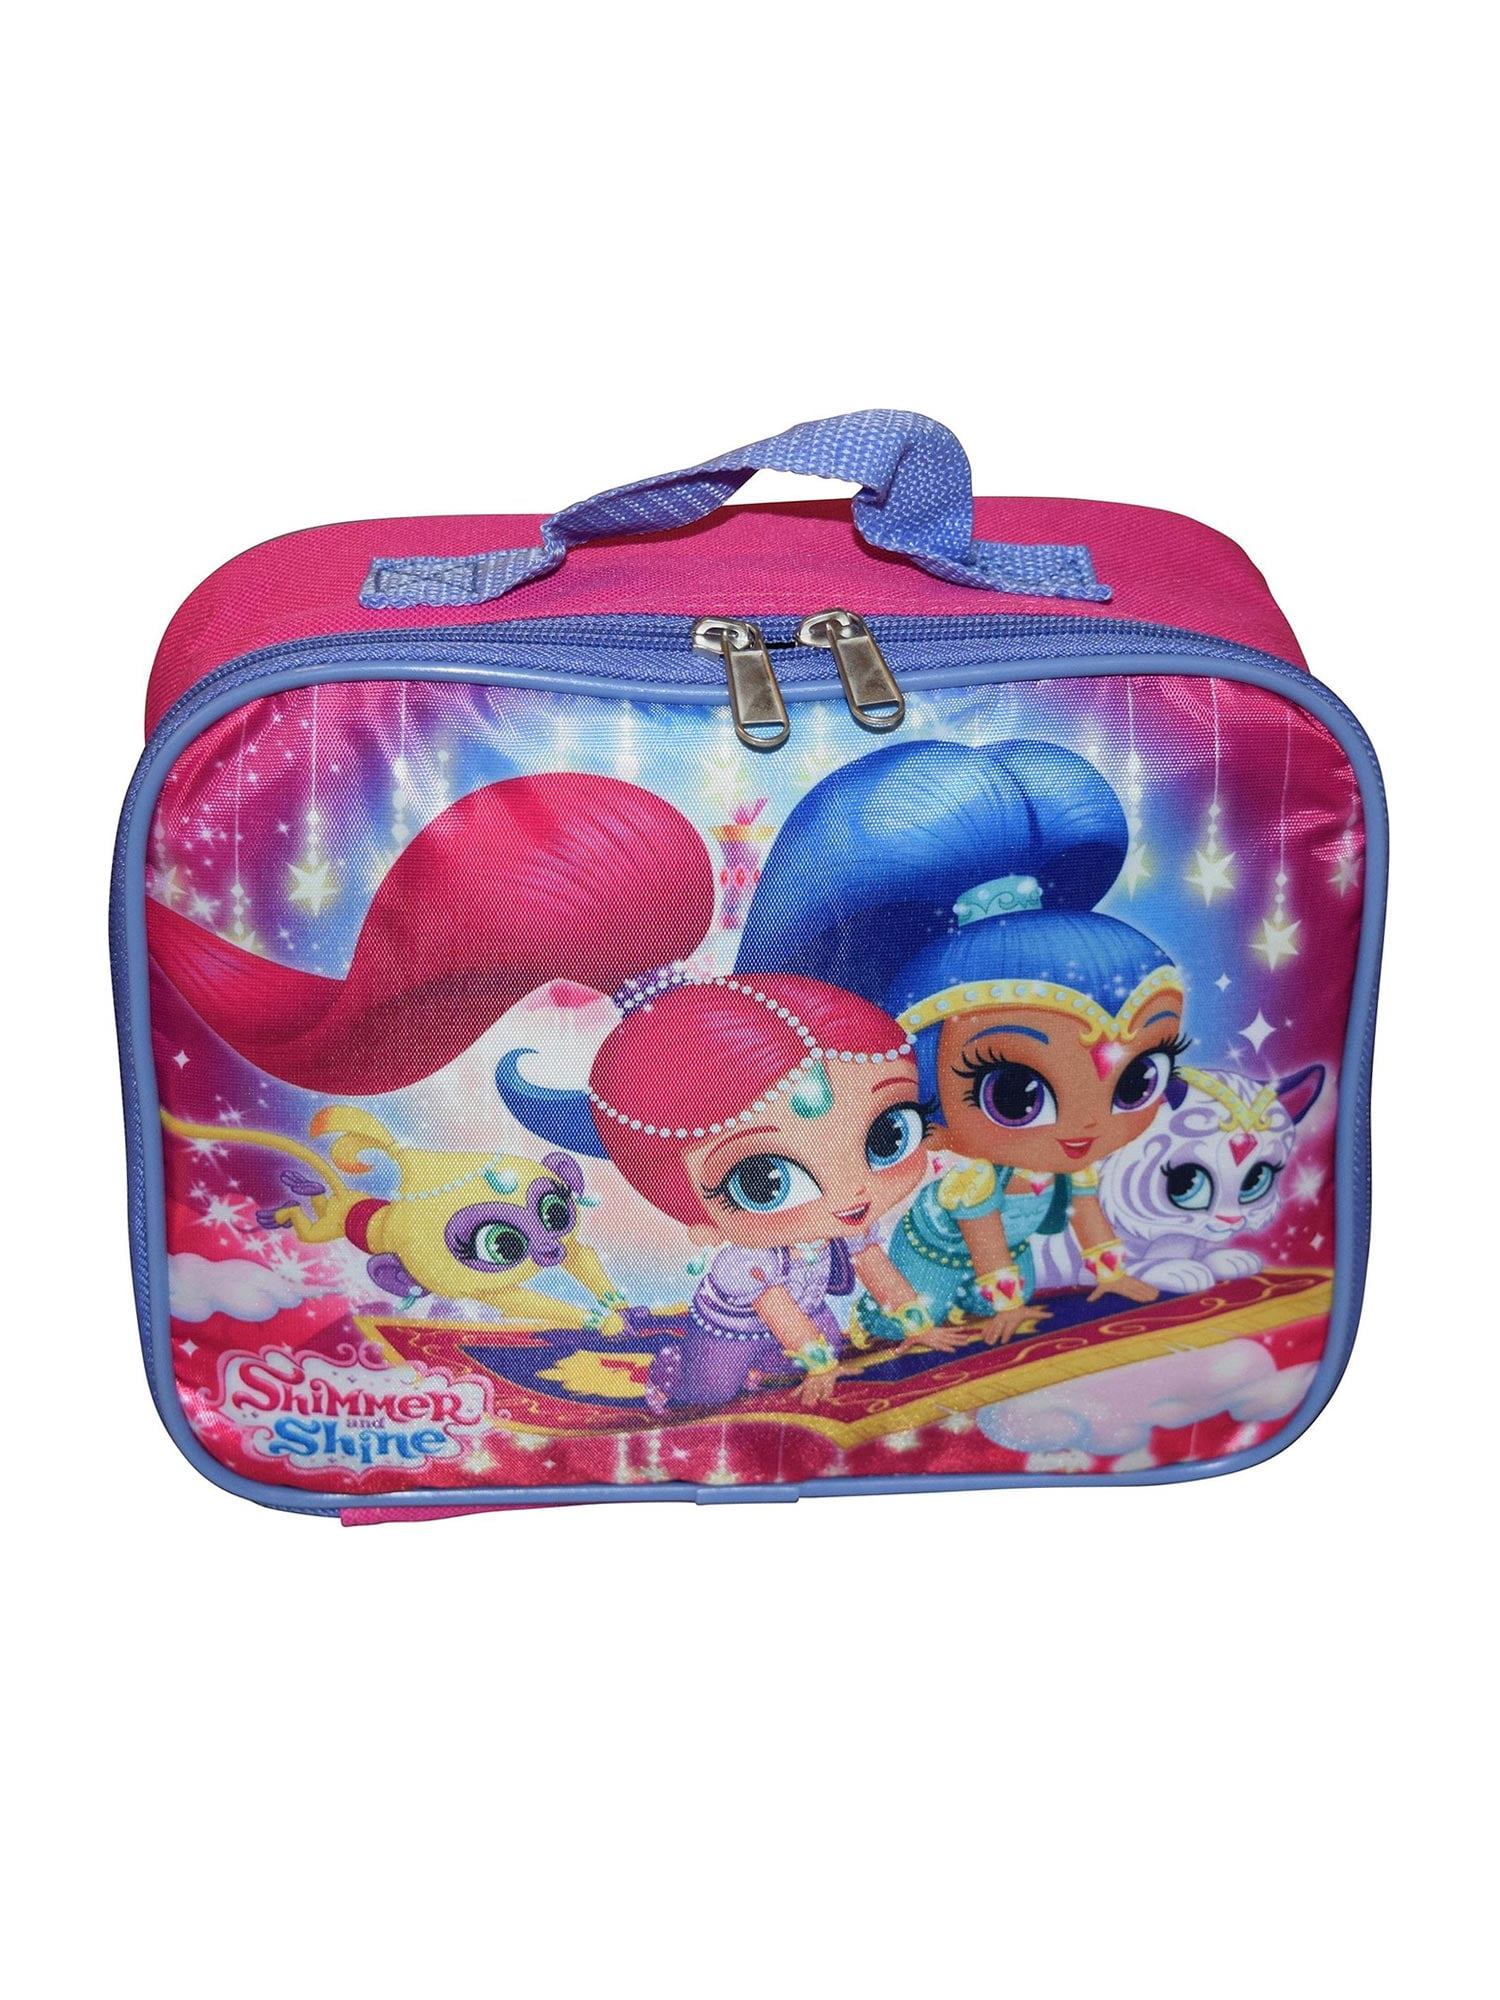 SHIMMER and SHINE Lunch Bag tote Insulated School Bag Magic Carpet Nahal Tala 